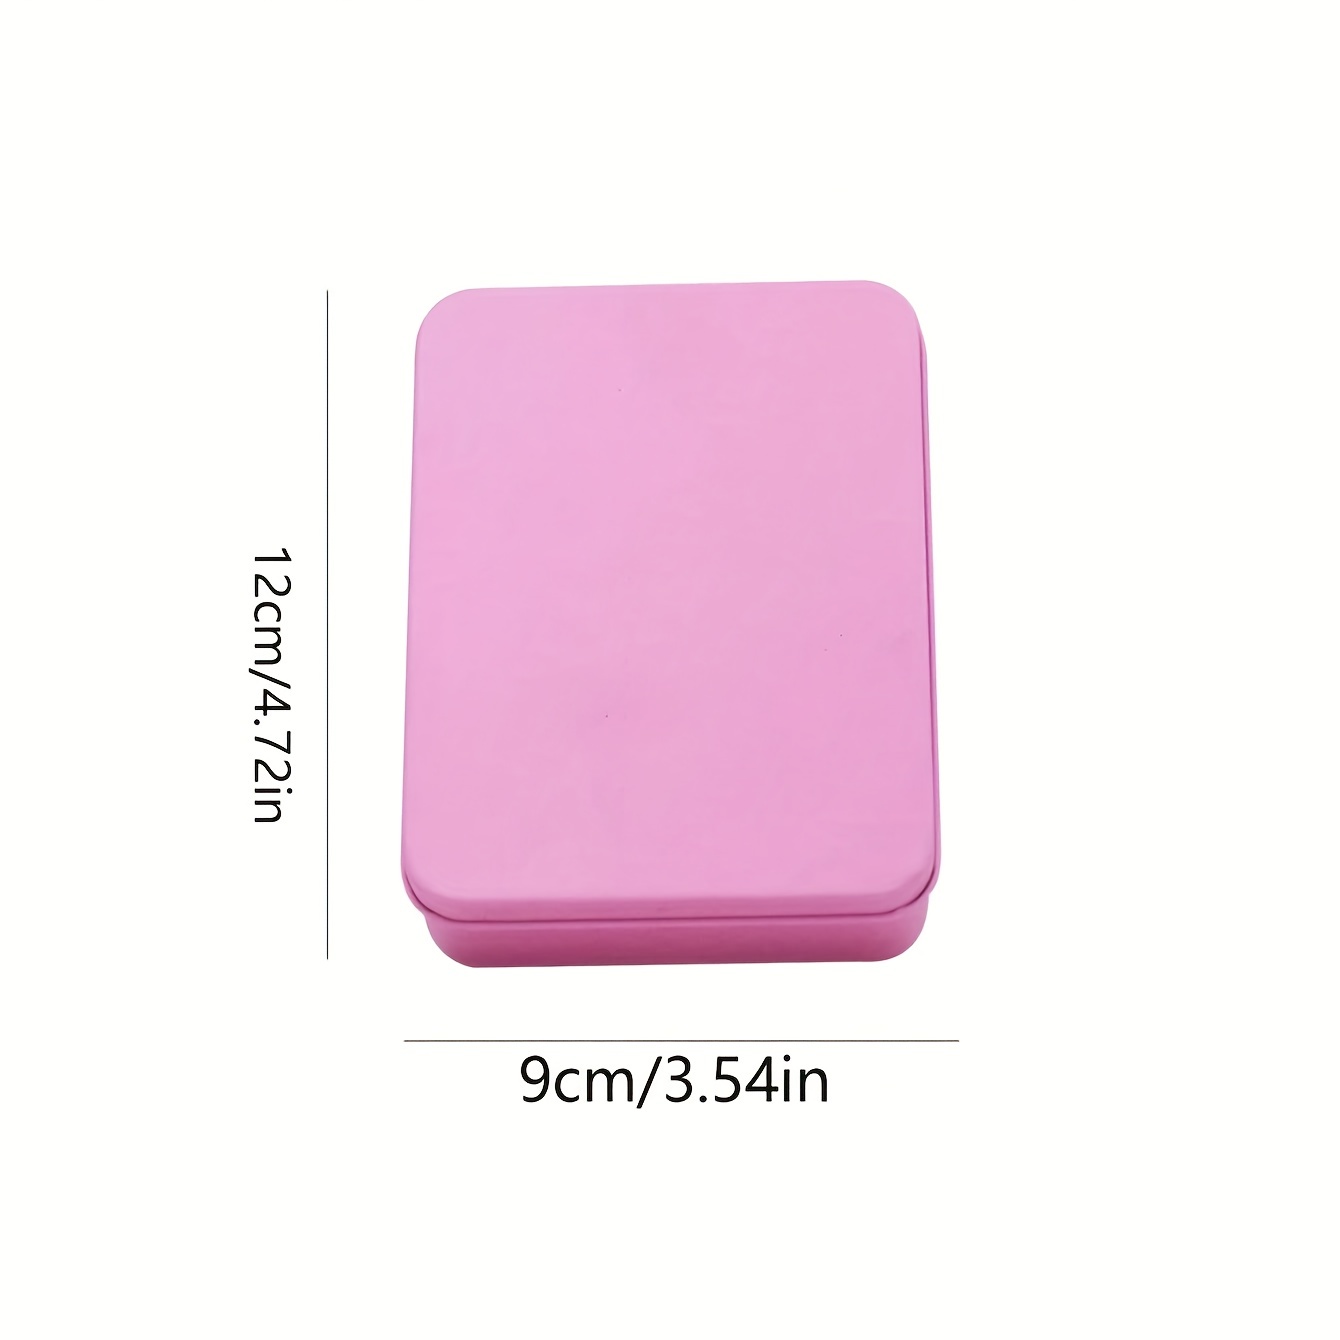 12cm *9cm *4cm Tin Case Storage Box Metal Products Rectangle Container For  Beads Business Card Candy Herbs DH9811 From Summerxixi, $2.2